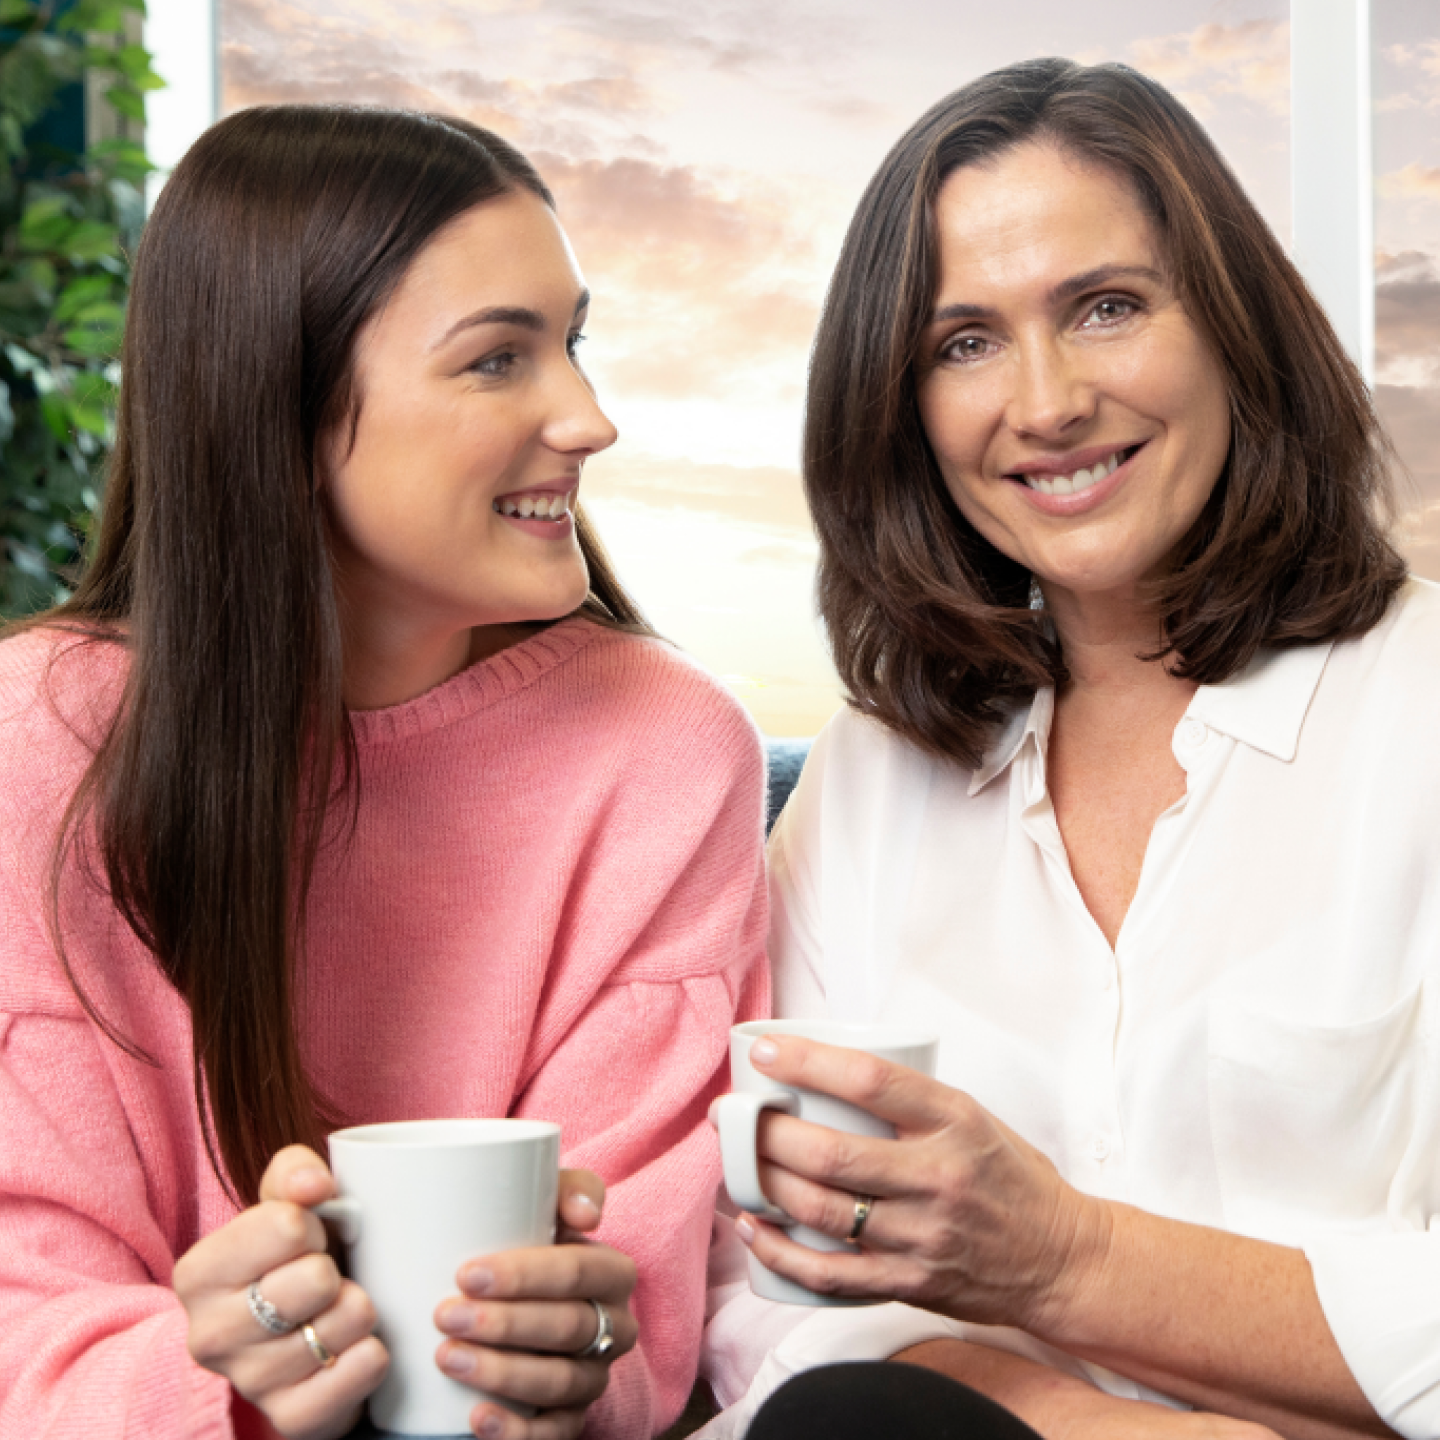 woman in a pink sweater holding a mug smiling at another smiling woman in a white shirt holding a mug